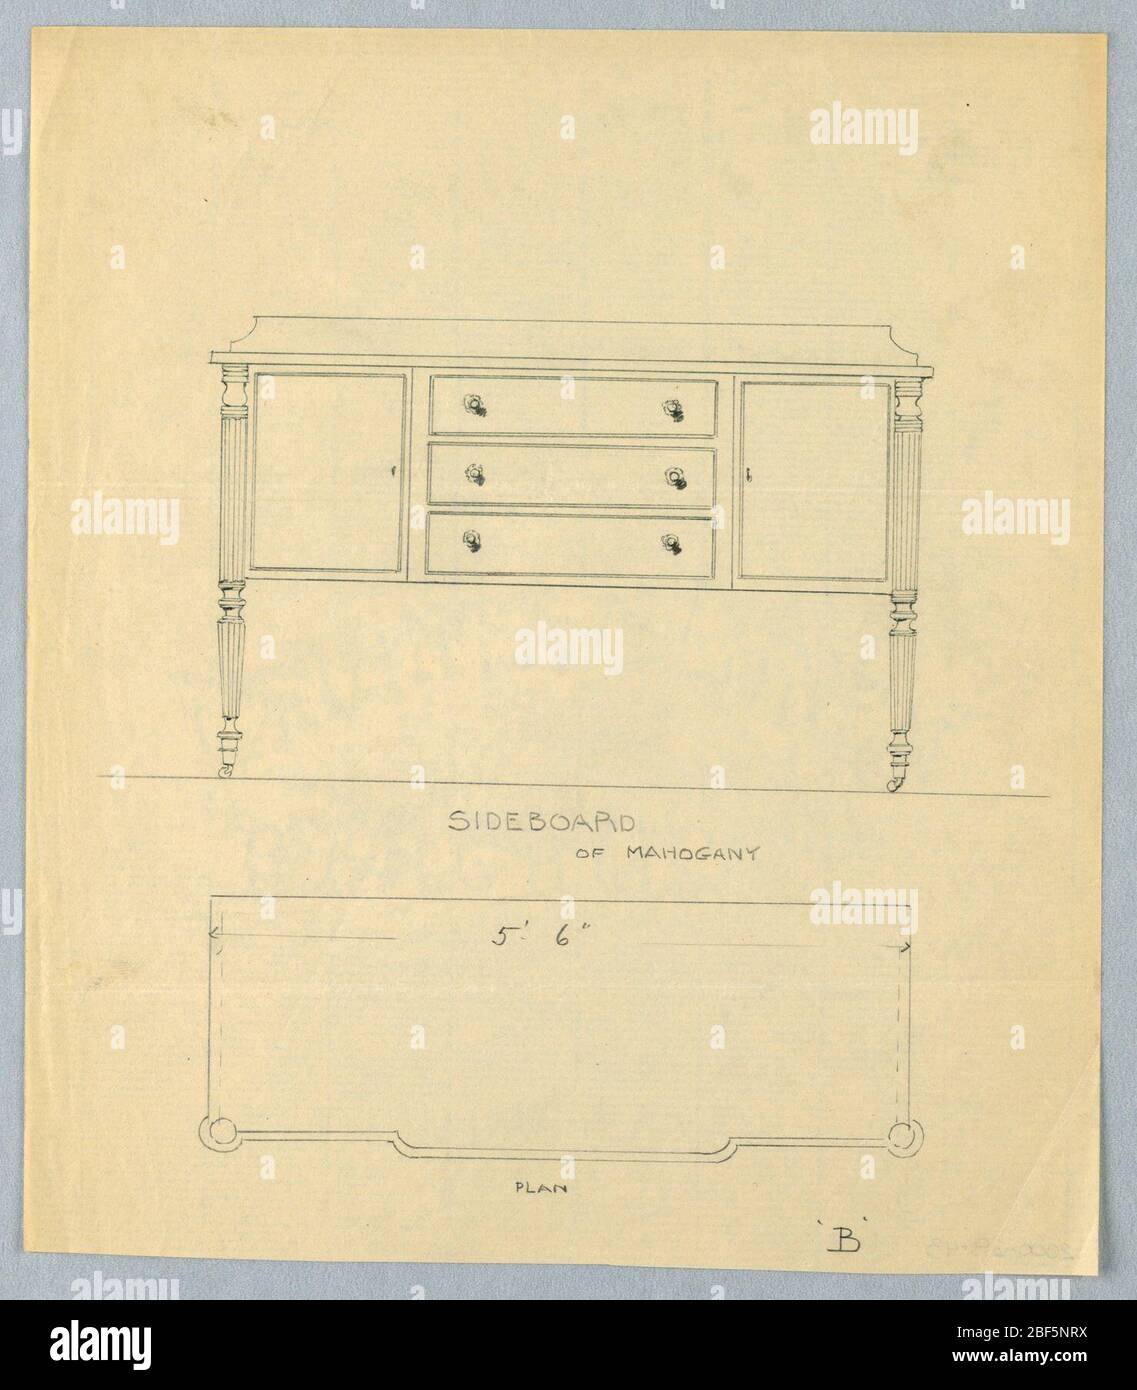 Design in Plan and Elevation for Mahogany Sideboard on Casters. Elevation view: rectangular sideboard with 4 turned and fluted straight tapering legs on casters; tri-partite front has 3 drawers flanked by 2 doors; low backsplash.Plan view: slightly protruding front section with rounded front corners. Stock Photo